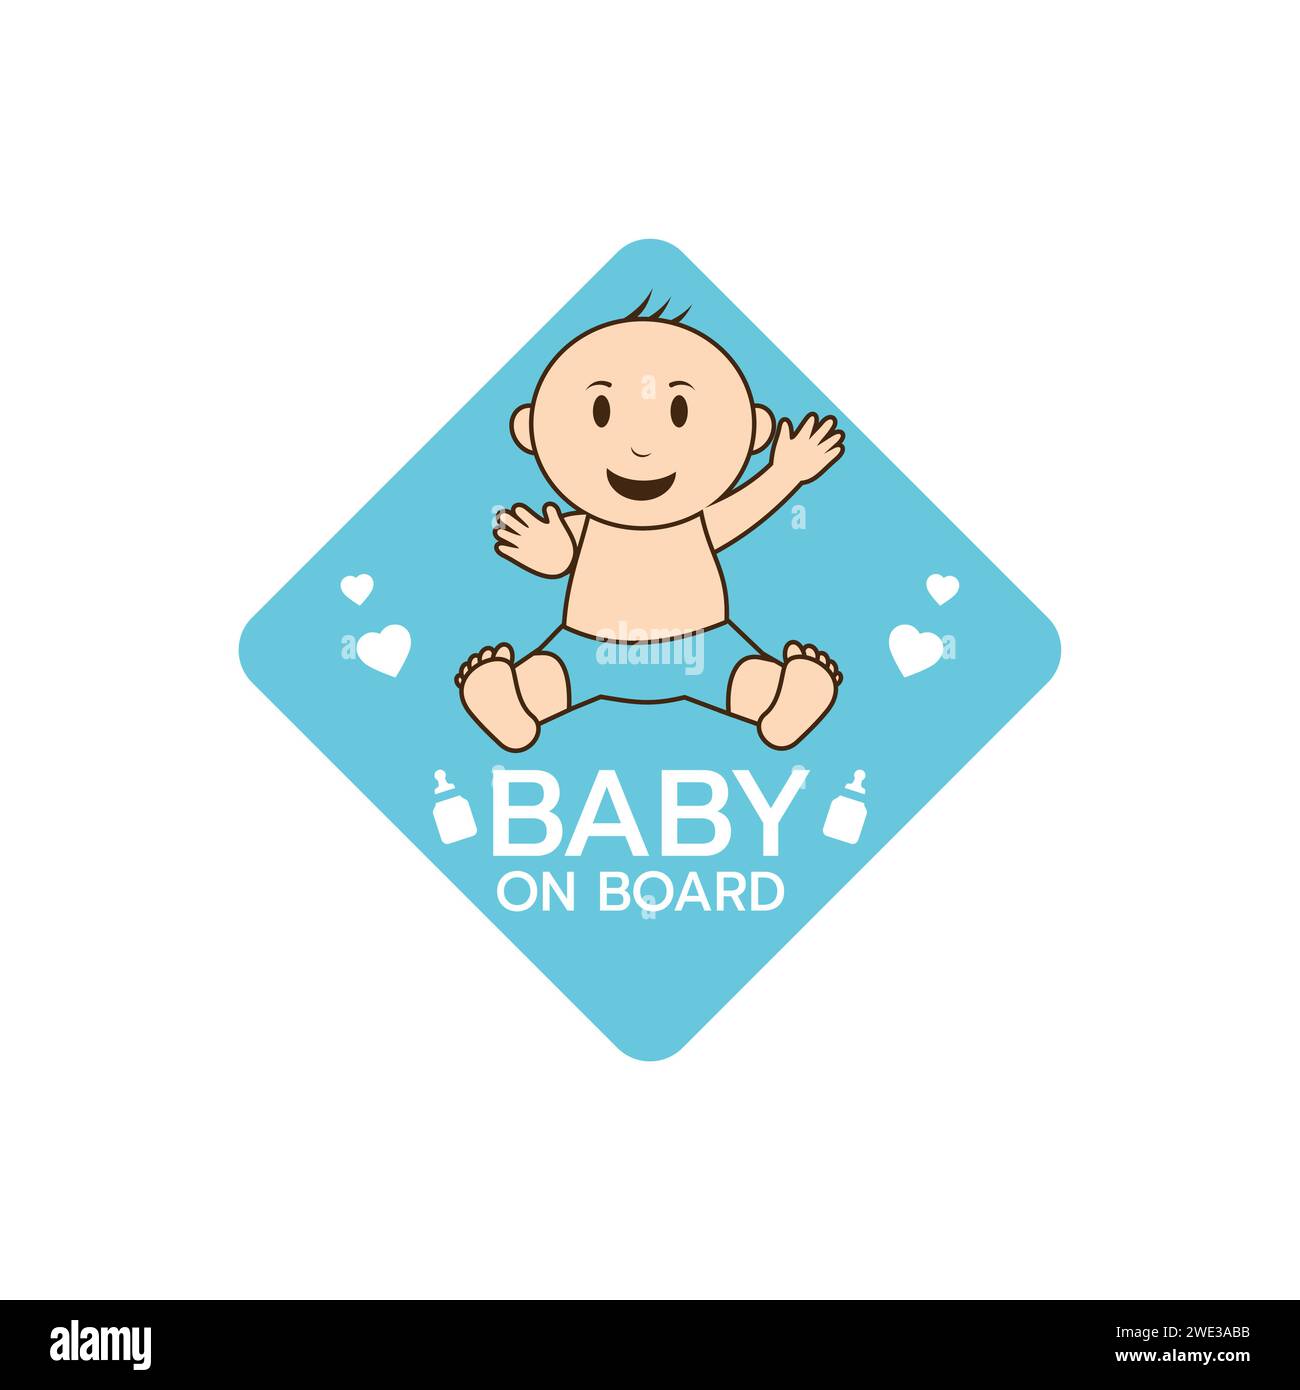 Baby on board sign logo icon. Child safety sticker warning emblem. Cute Baby safety design illustration,Funny small smiling boy or girl. The sticker o Stock Vector